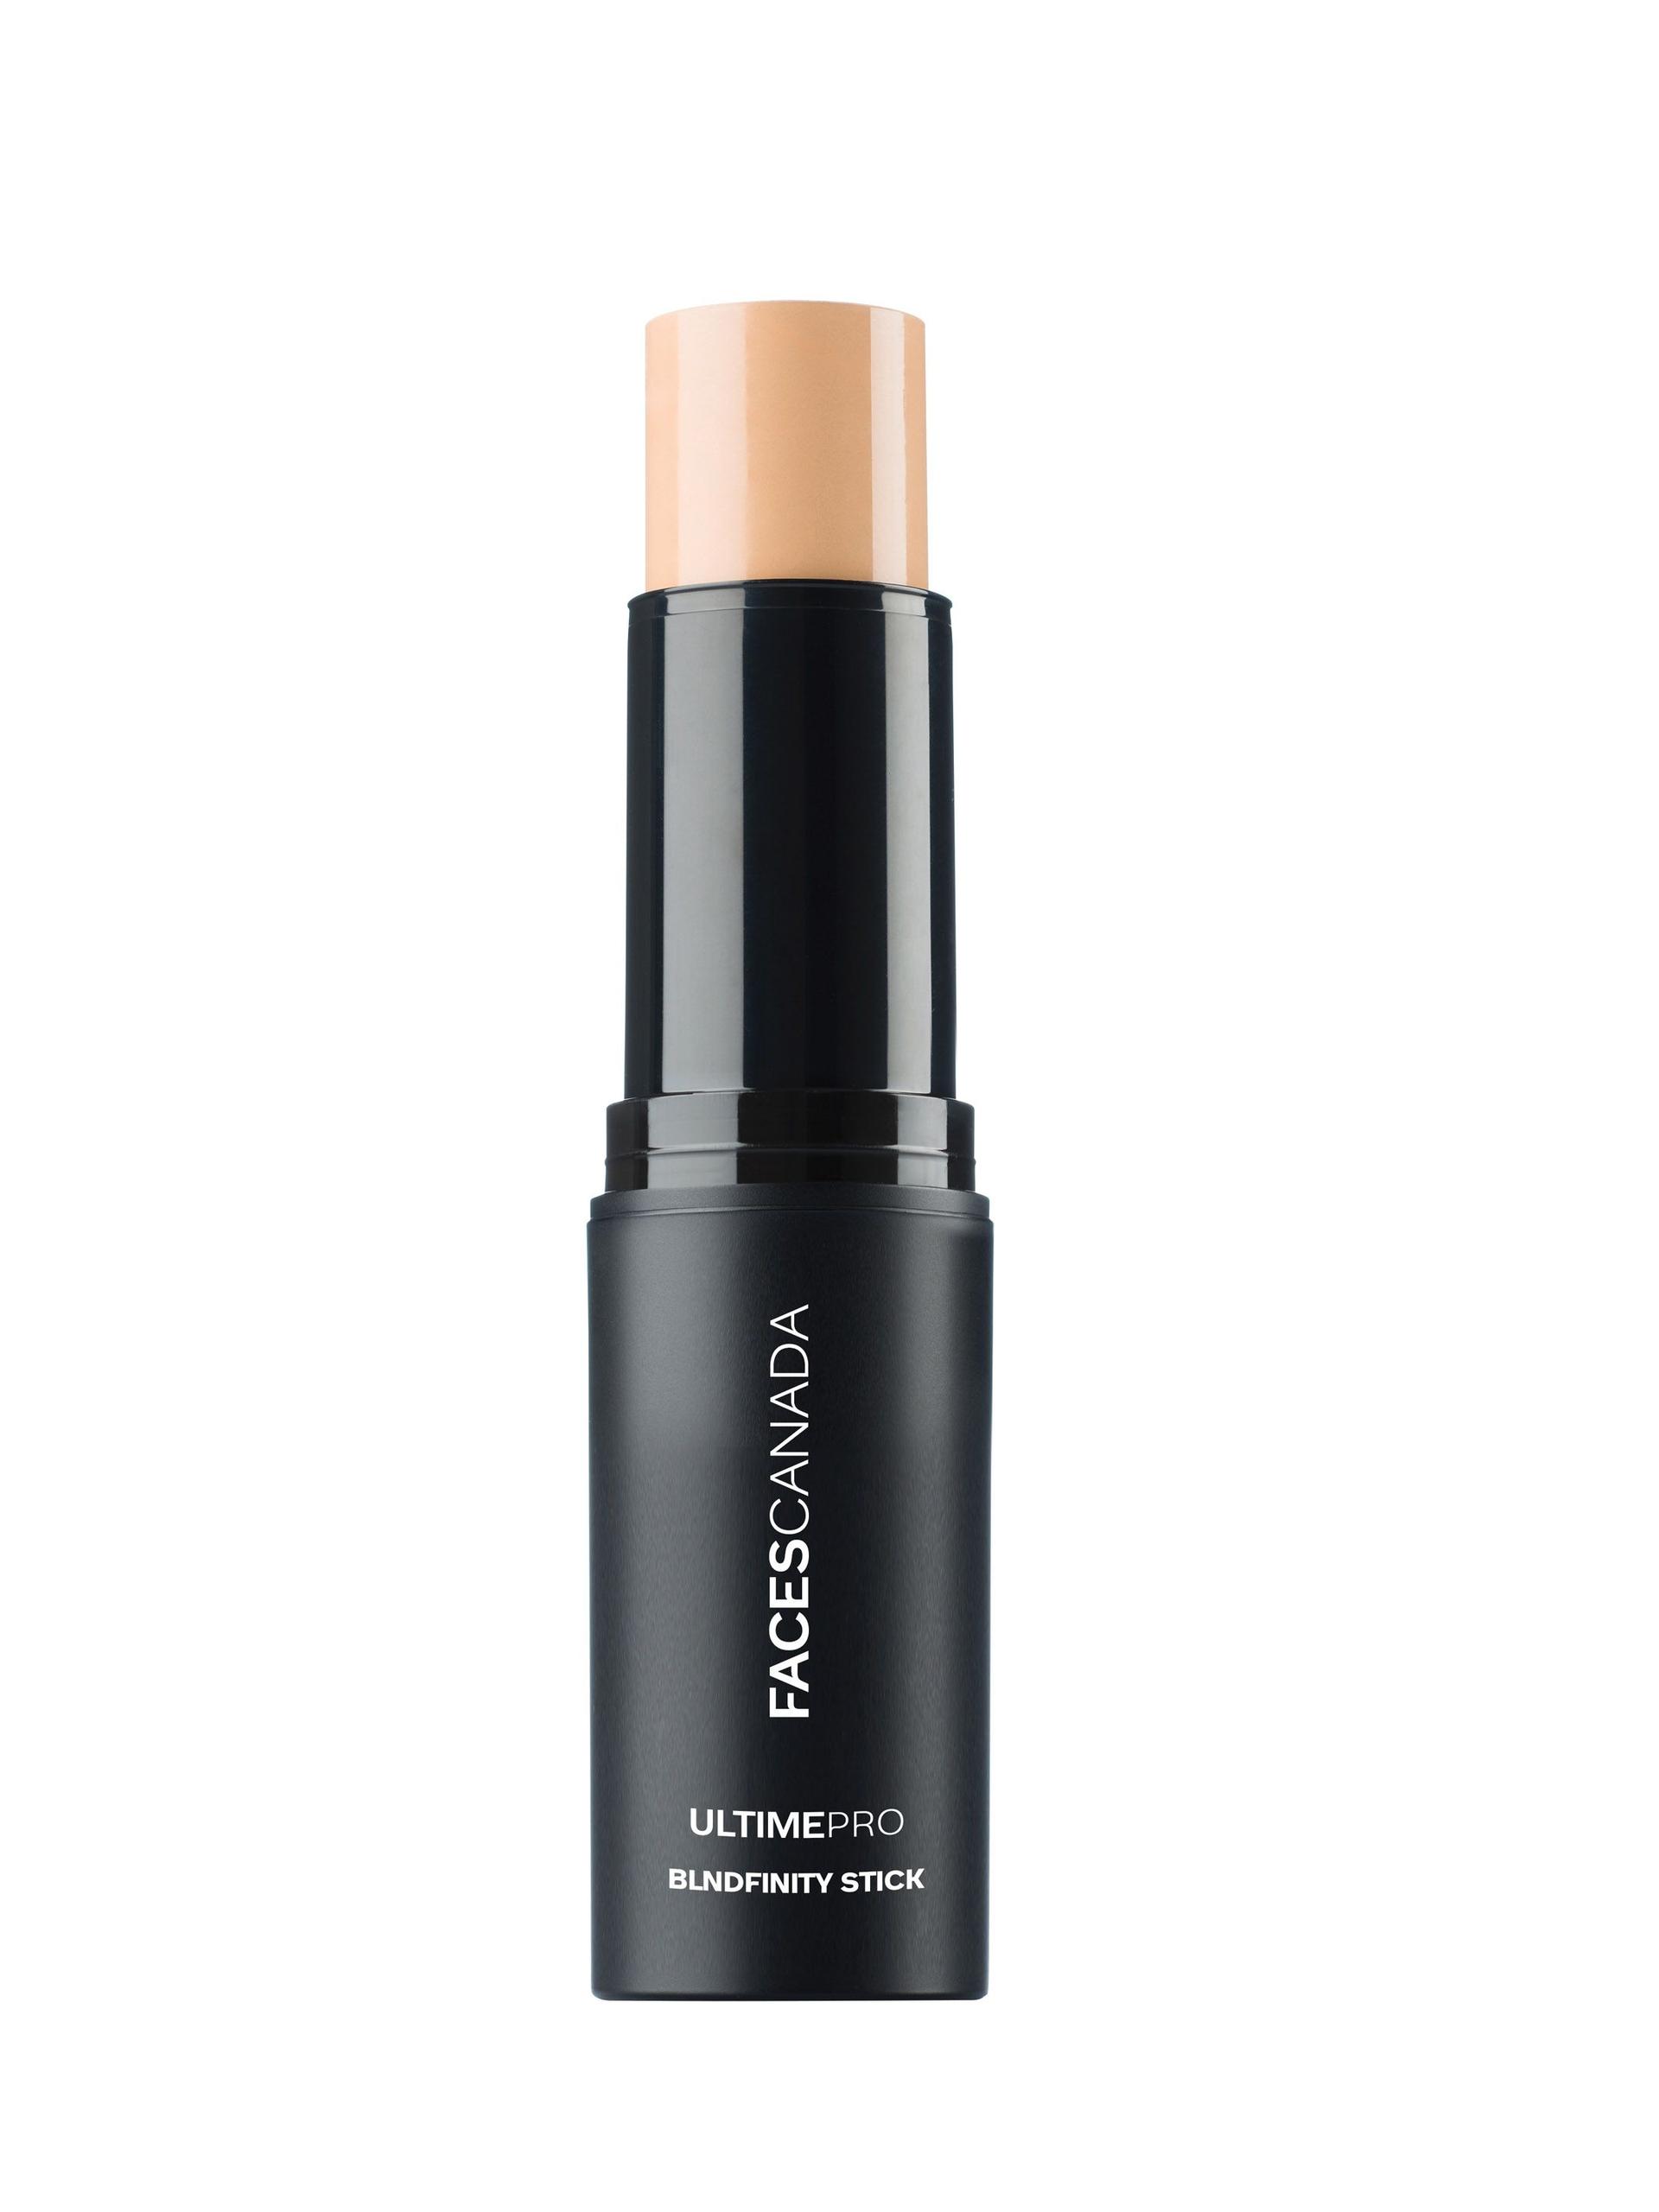 faces canada ultime pro blendfinity stick foundation 11g - ivory 01